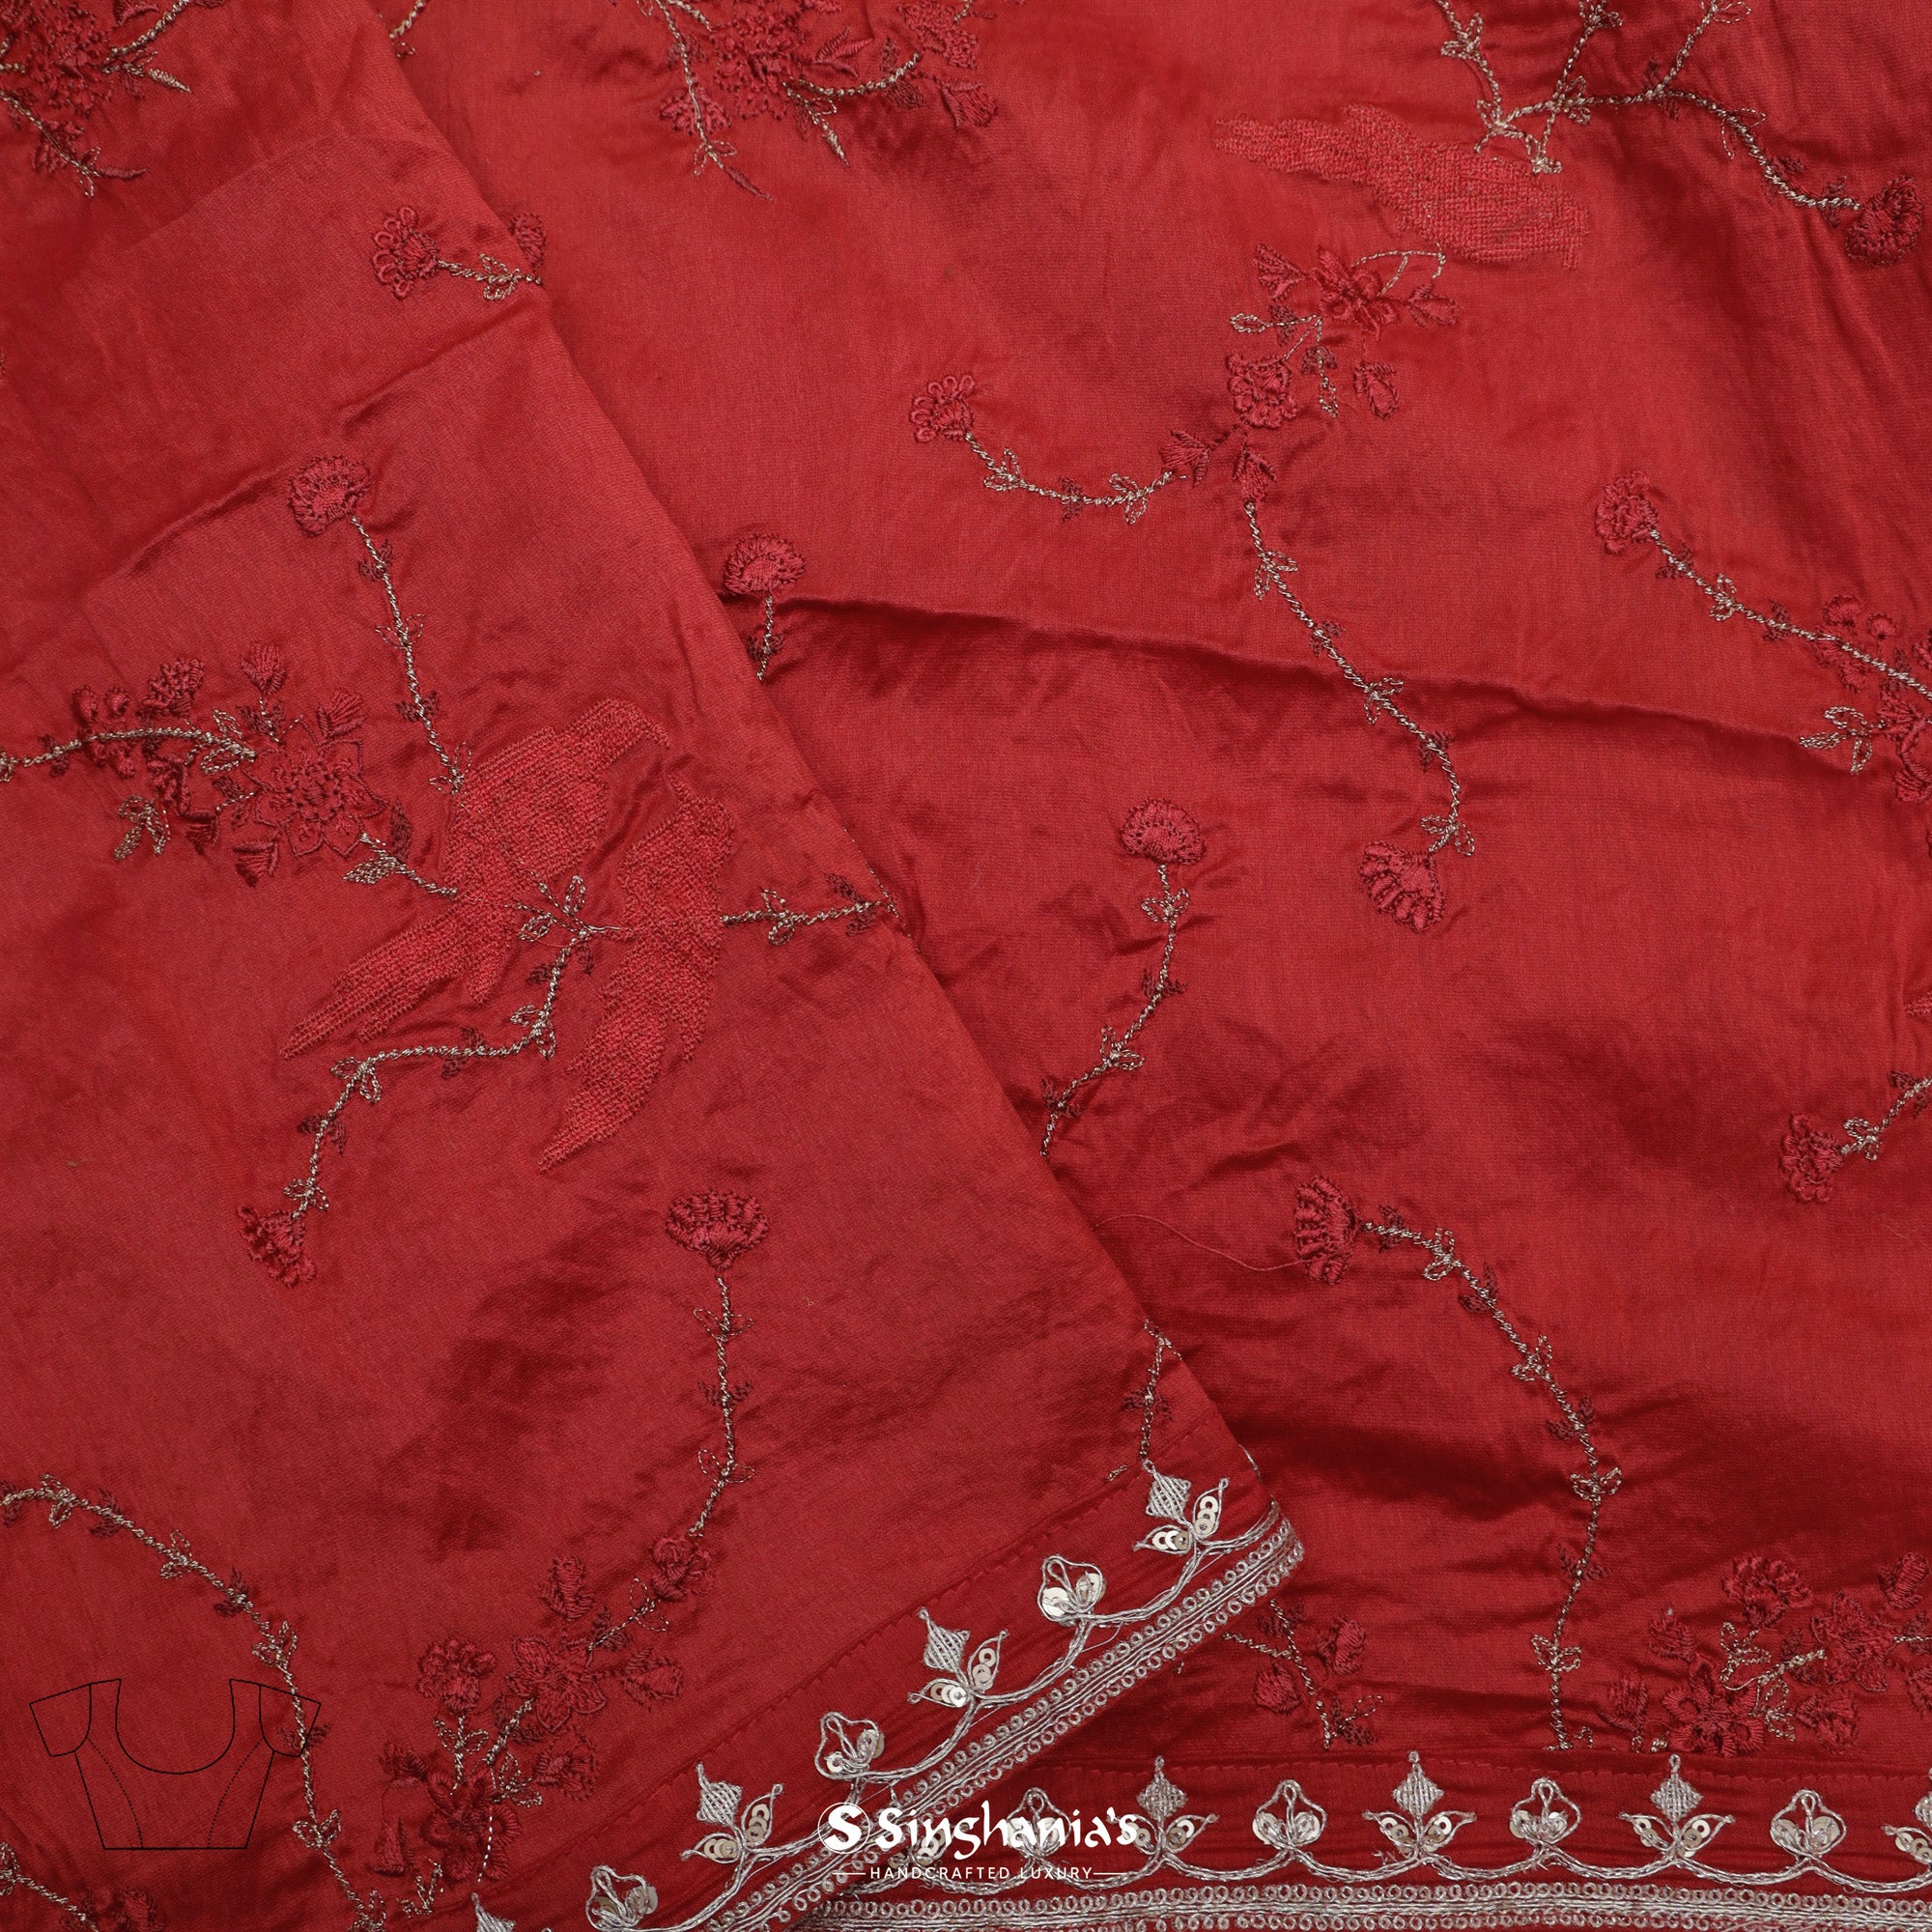 Imperial Red Organza Saree With Bandhani Work And Embroidery